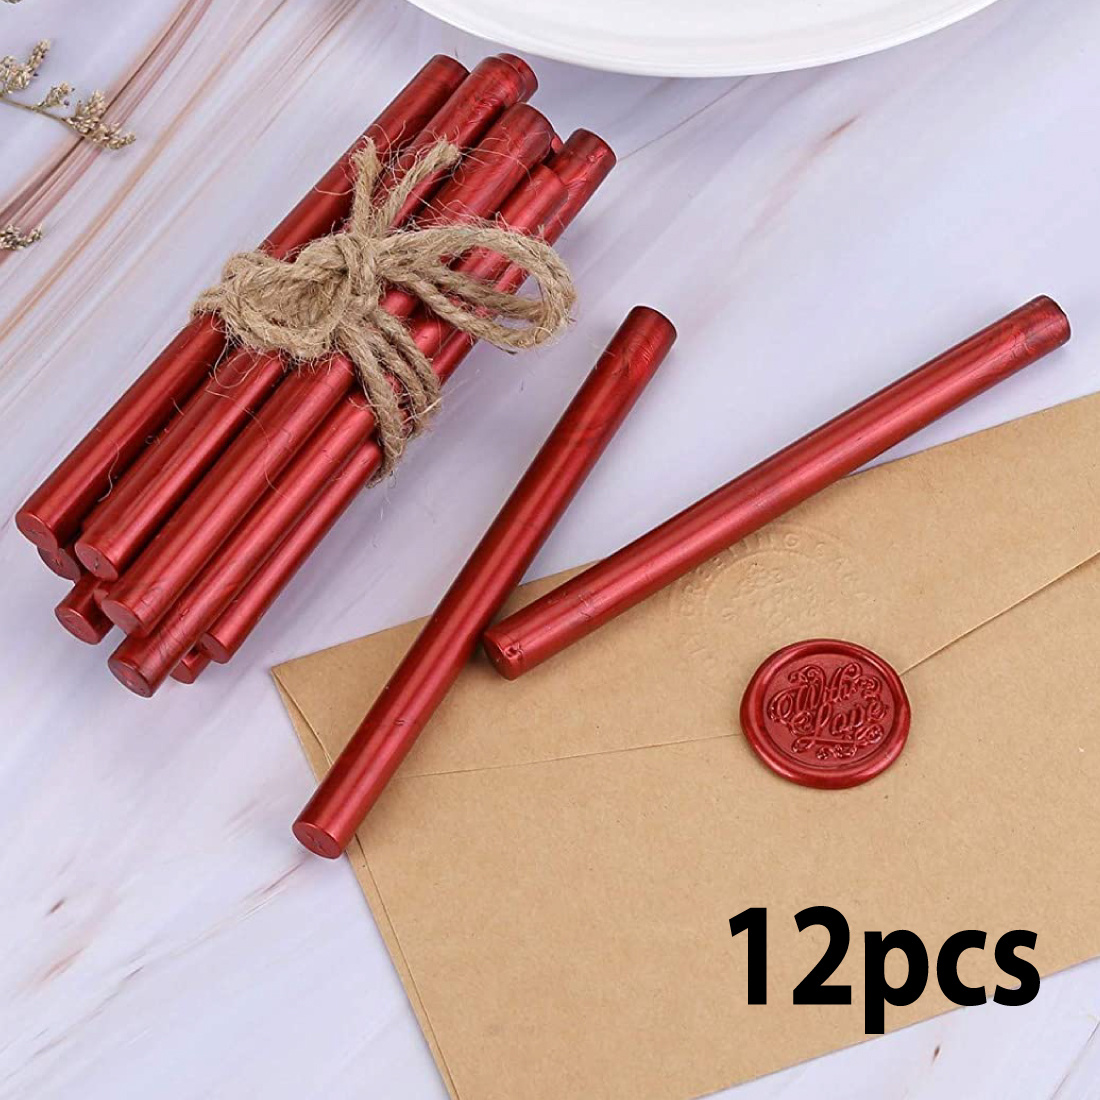  Wax Seal Kit with Sealing Wax Gun and 10pcs Blood Red Wax Seal  Sticks, to Make Wax Seals for Envelope Wedding Party Invitations Gift Wrap  in Bulk : Arts, Crafts 